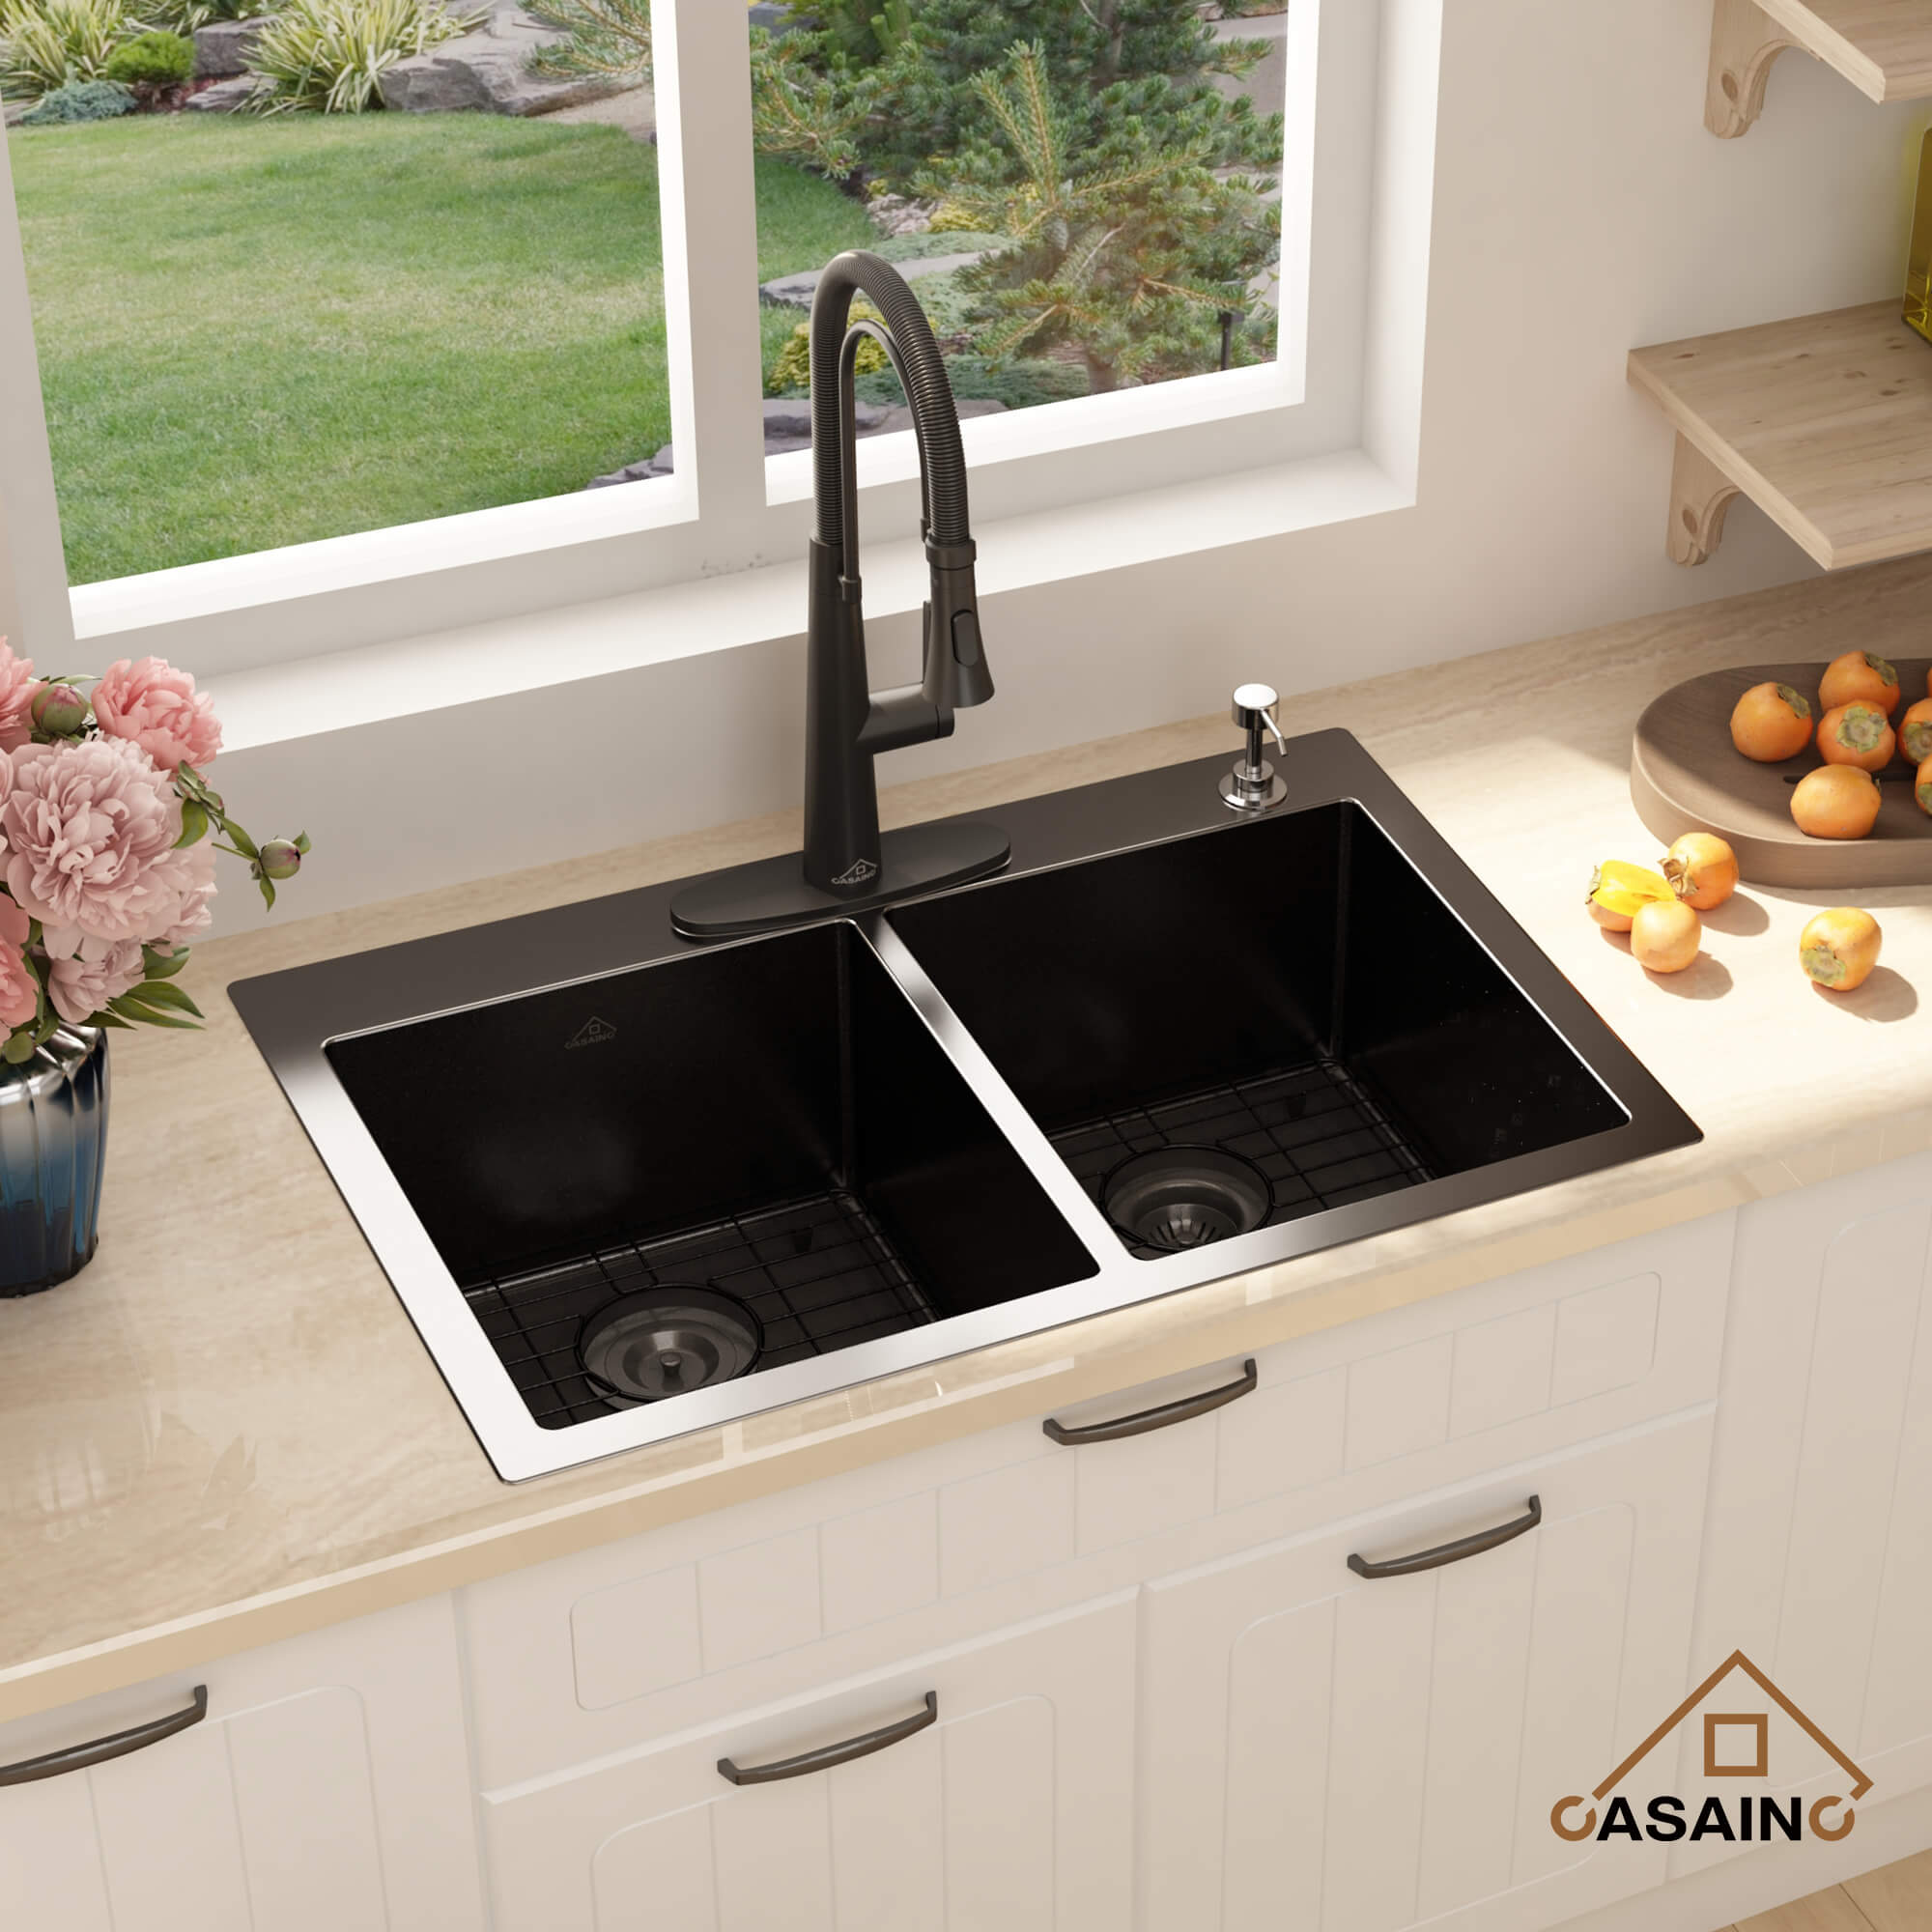 33" Efficient Double Basin 304 Stainless Steel Double Basin Sink with Nano-Coating for Easy Cleaning, Quick Drainage, Silent Operation, PVD Technology, X-Type Drainage